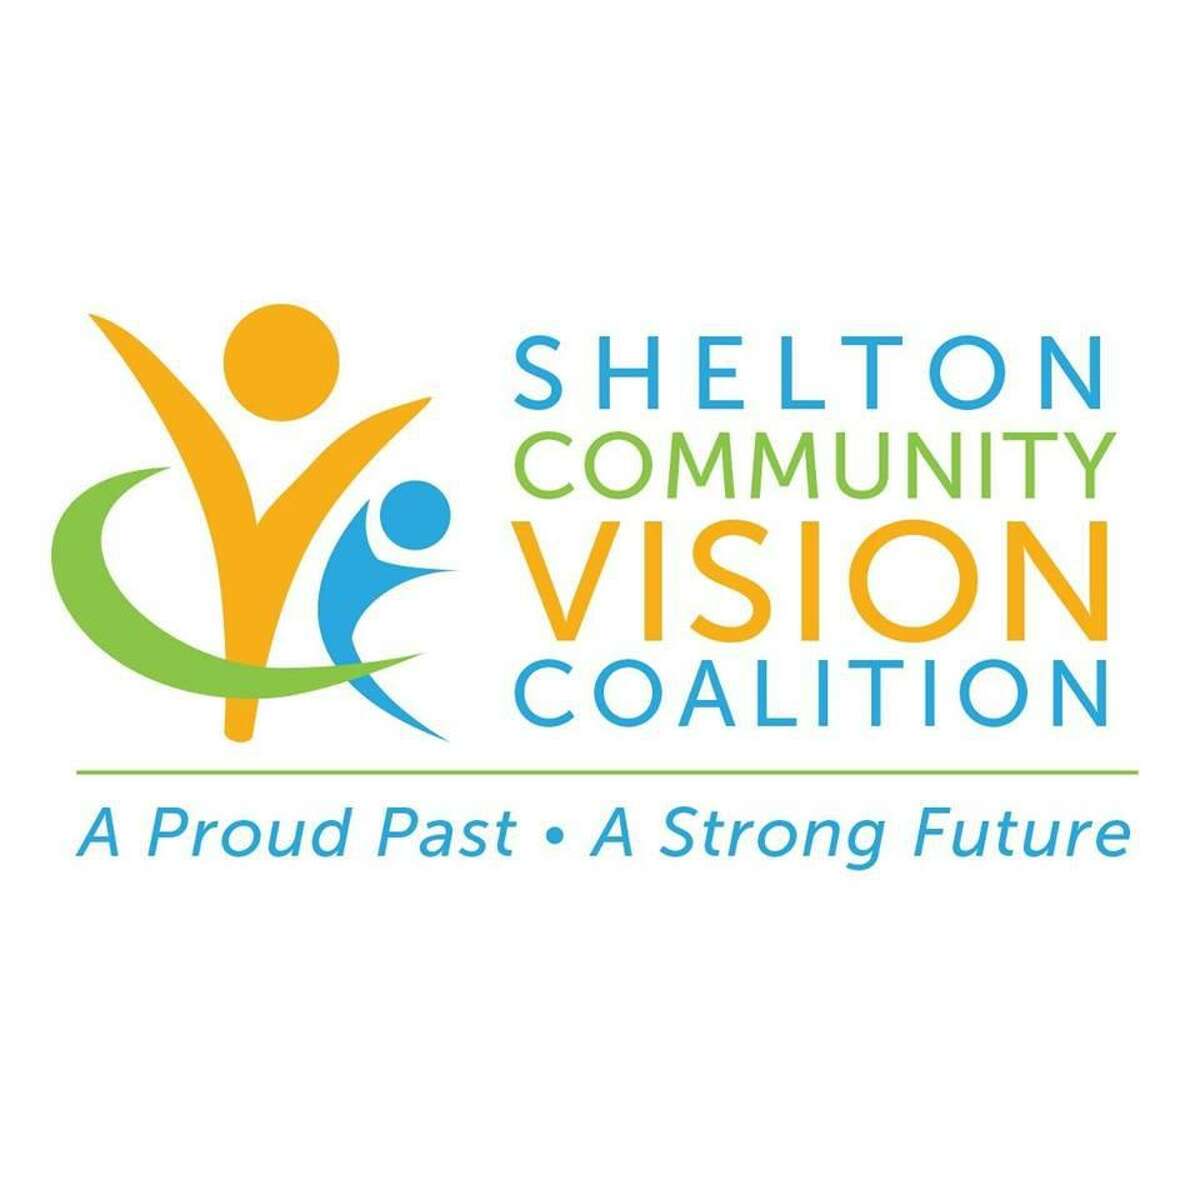 The Shelton Community Vision Coalition is hosting a “Meet the Candidates” event on Wednesday, Sept. 4, at Plumb Memorial Library.